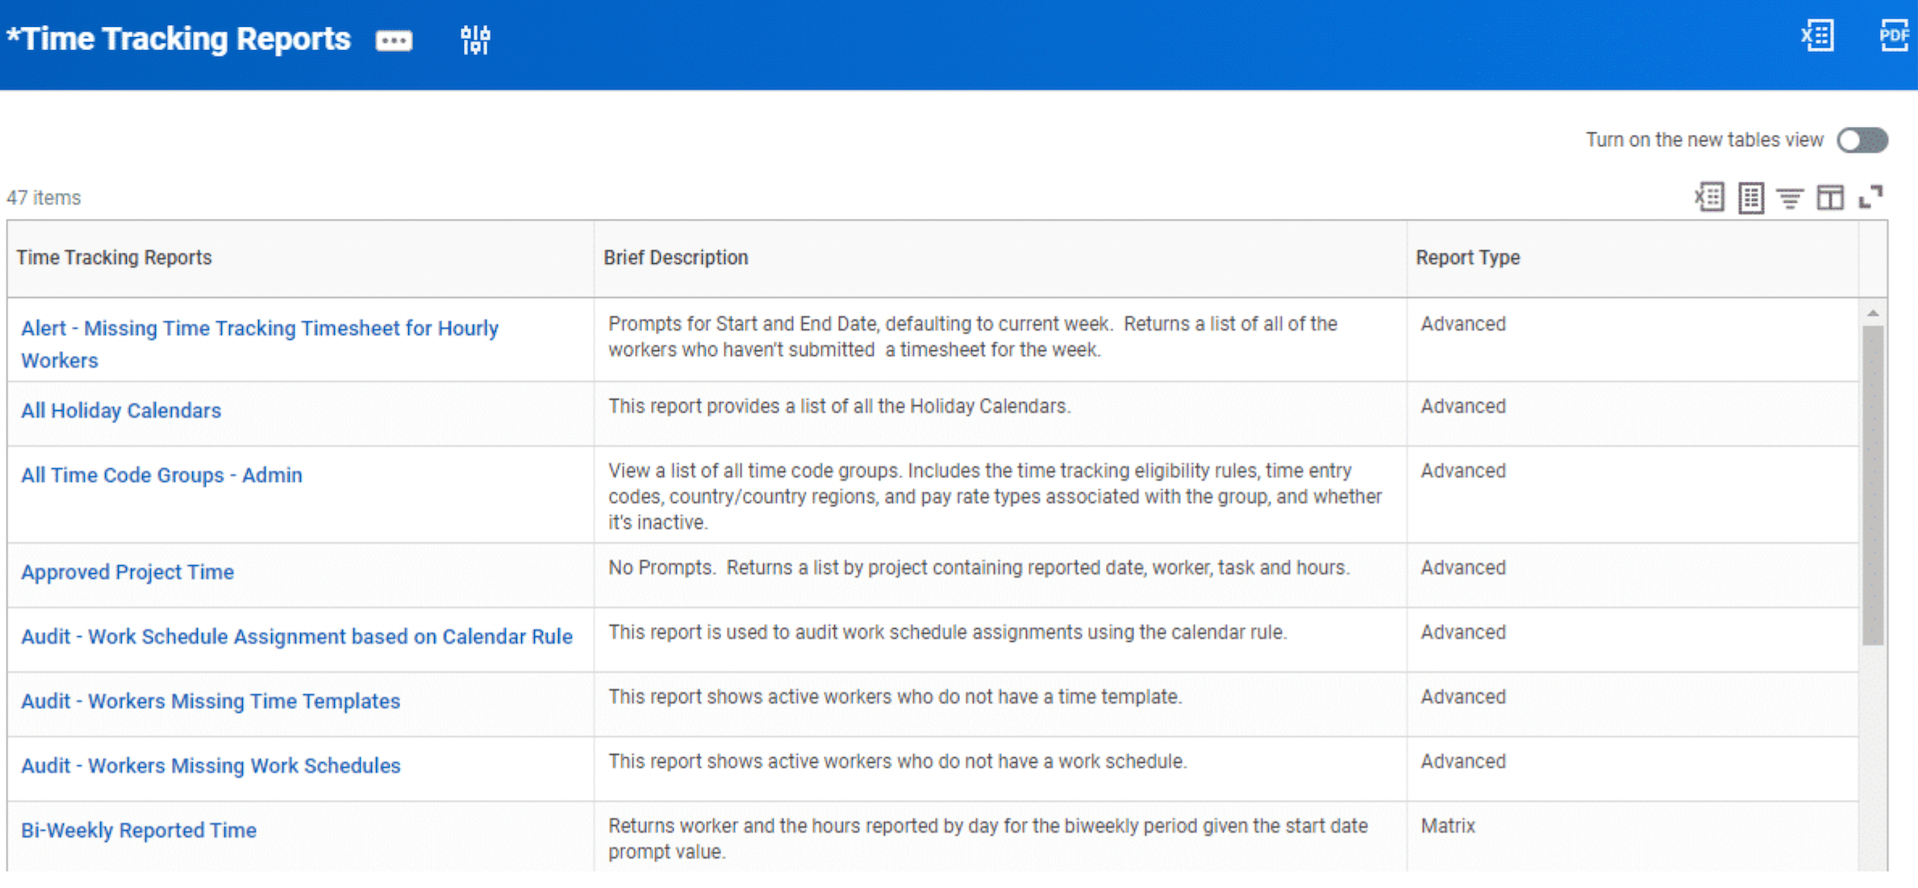 Time tracking reports in Workday